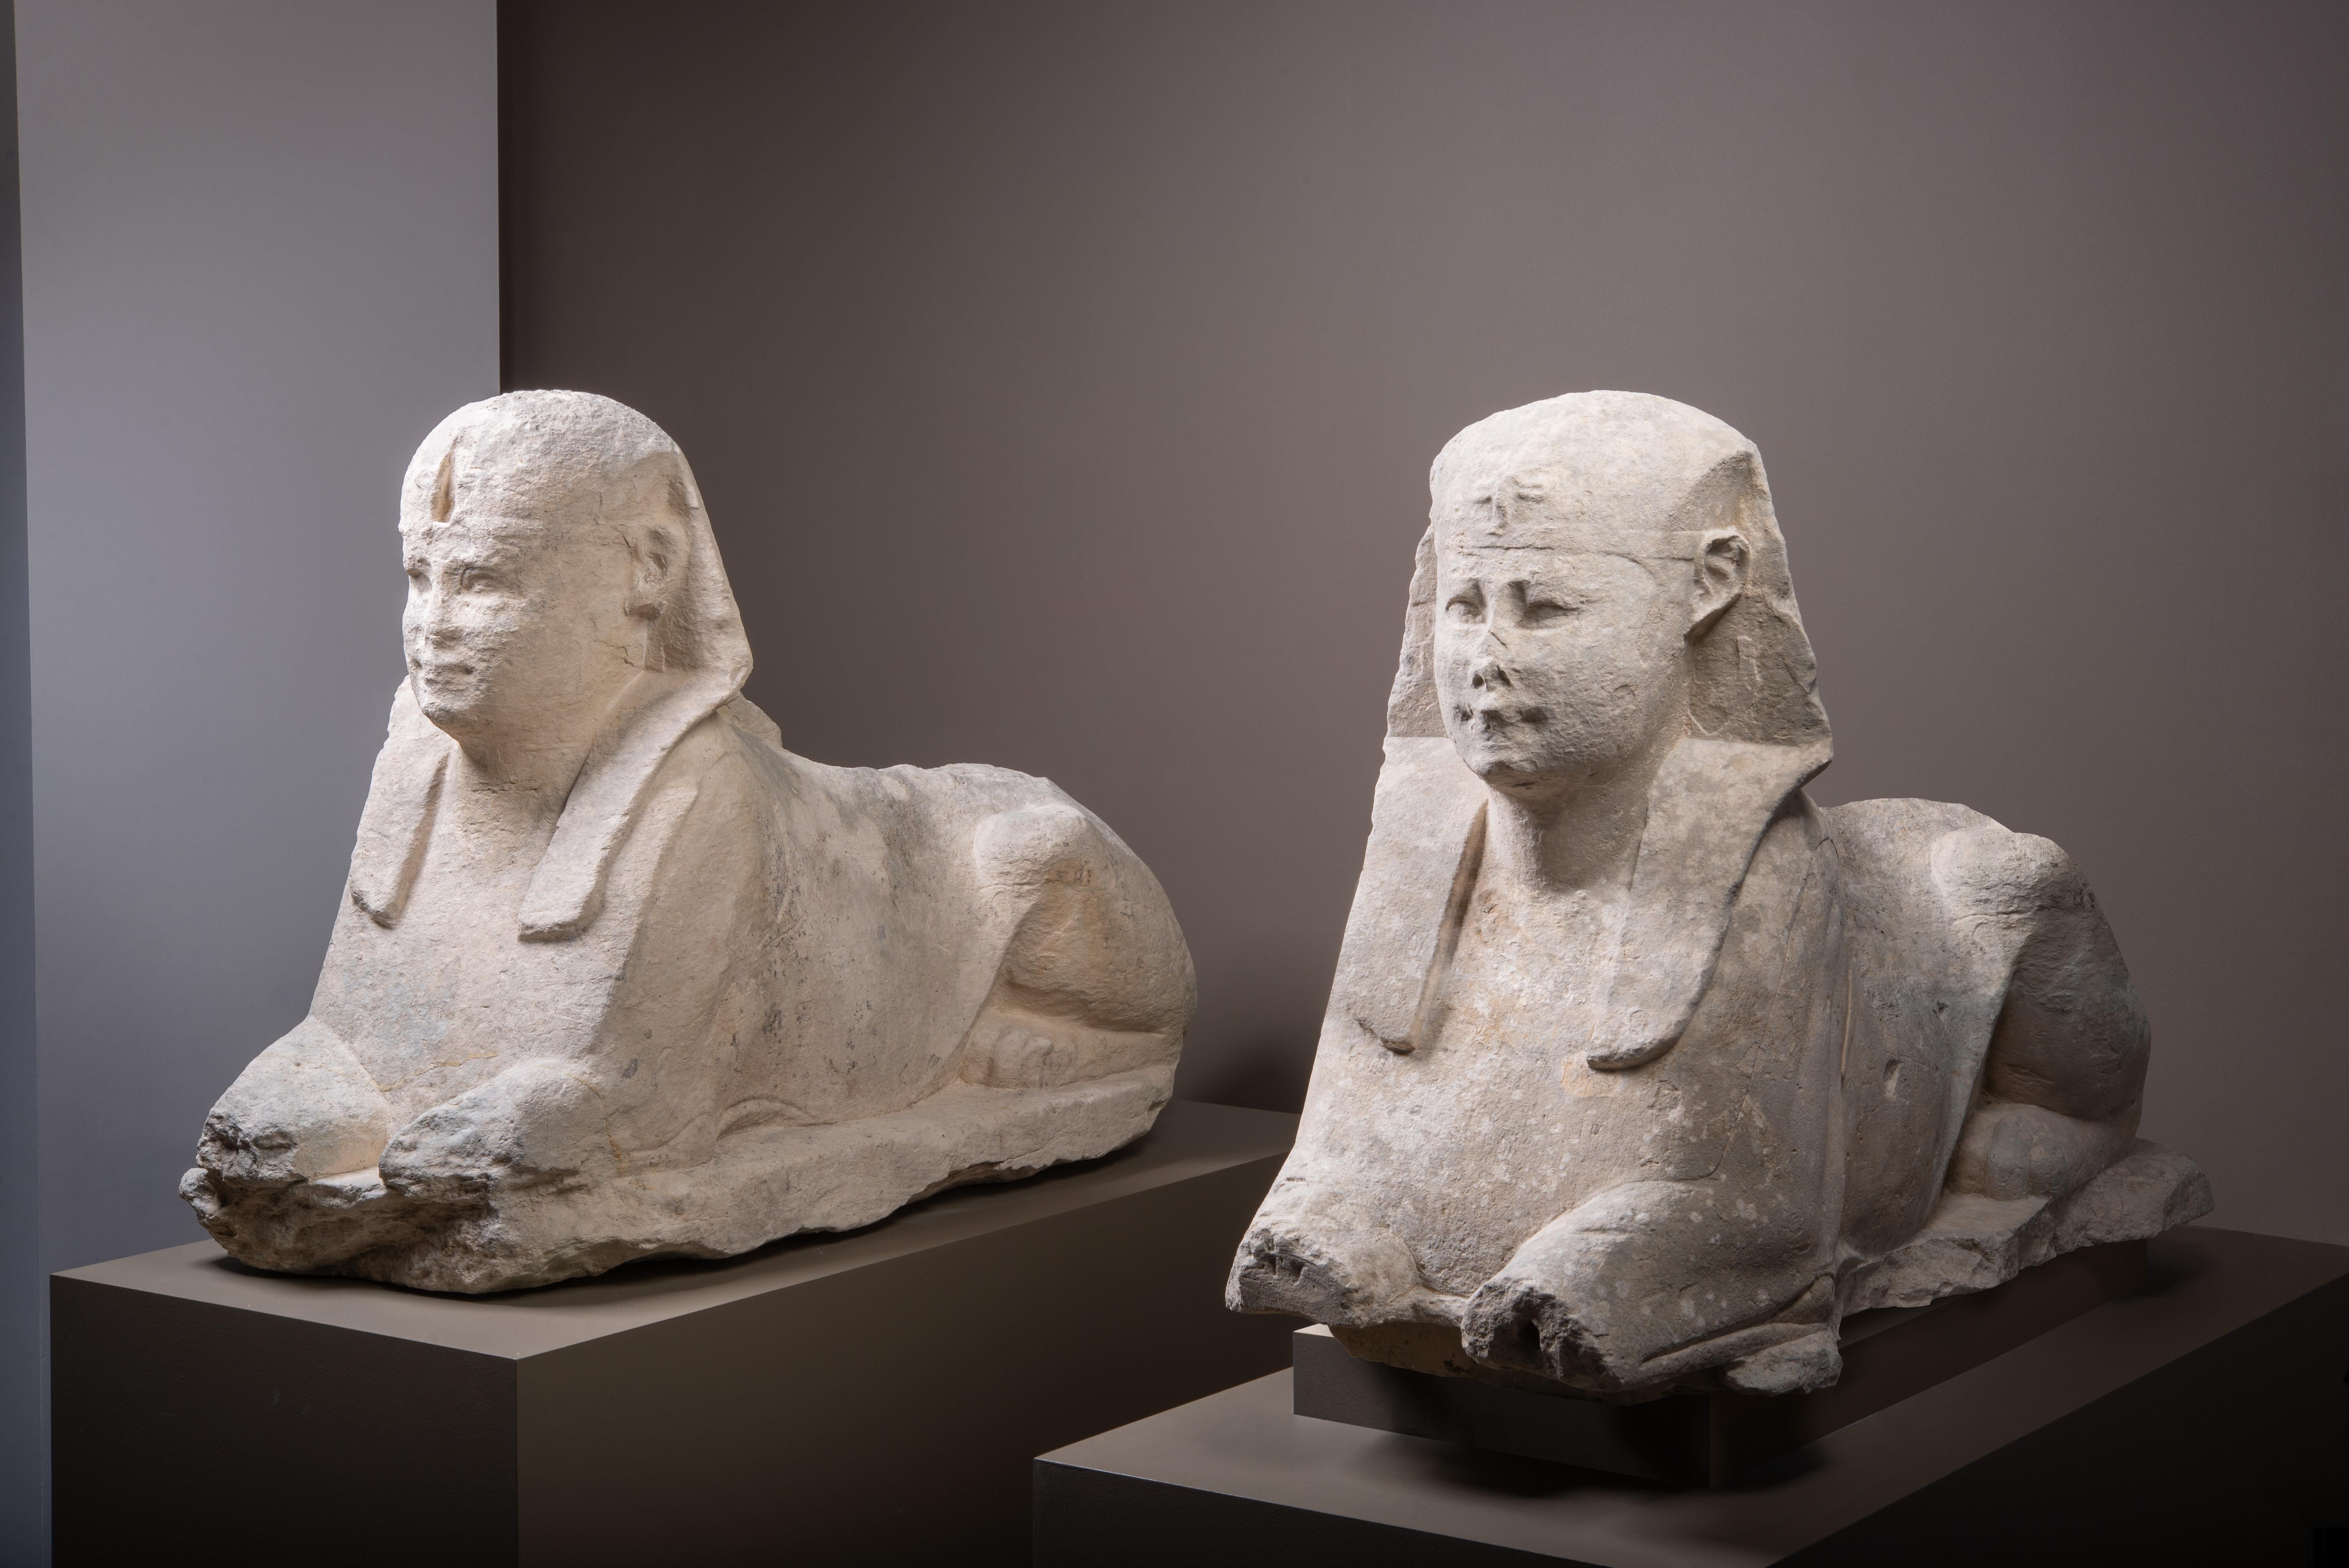 A pair of monumental limestone sphinxes of Pharaoh Nectanebo I, from the processional avenue of the Serapeum of Memphis, 30th Dynasty, circa 379 - 360 BC.

The sphinxes of the Serapeum have captivated travellers since Roman times. However, despite